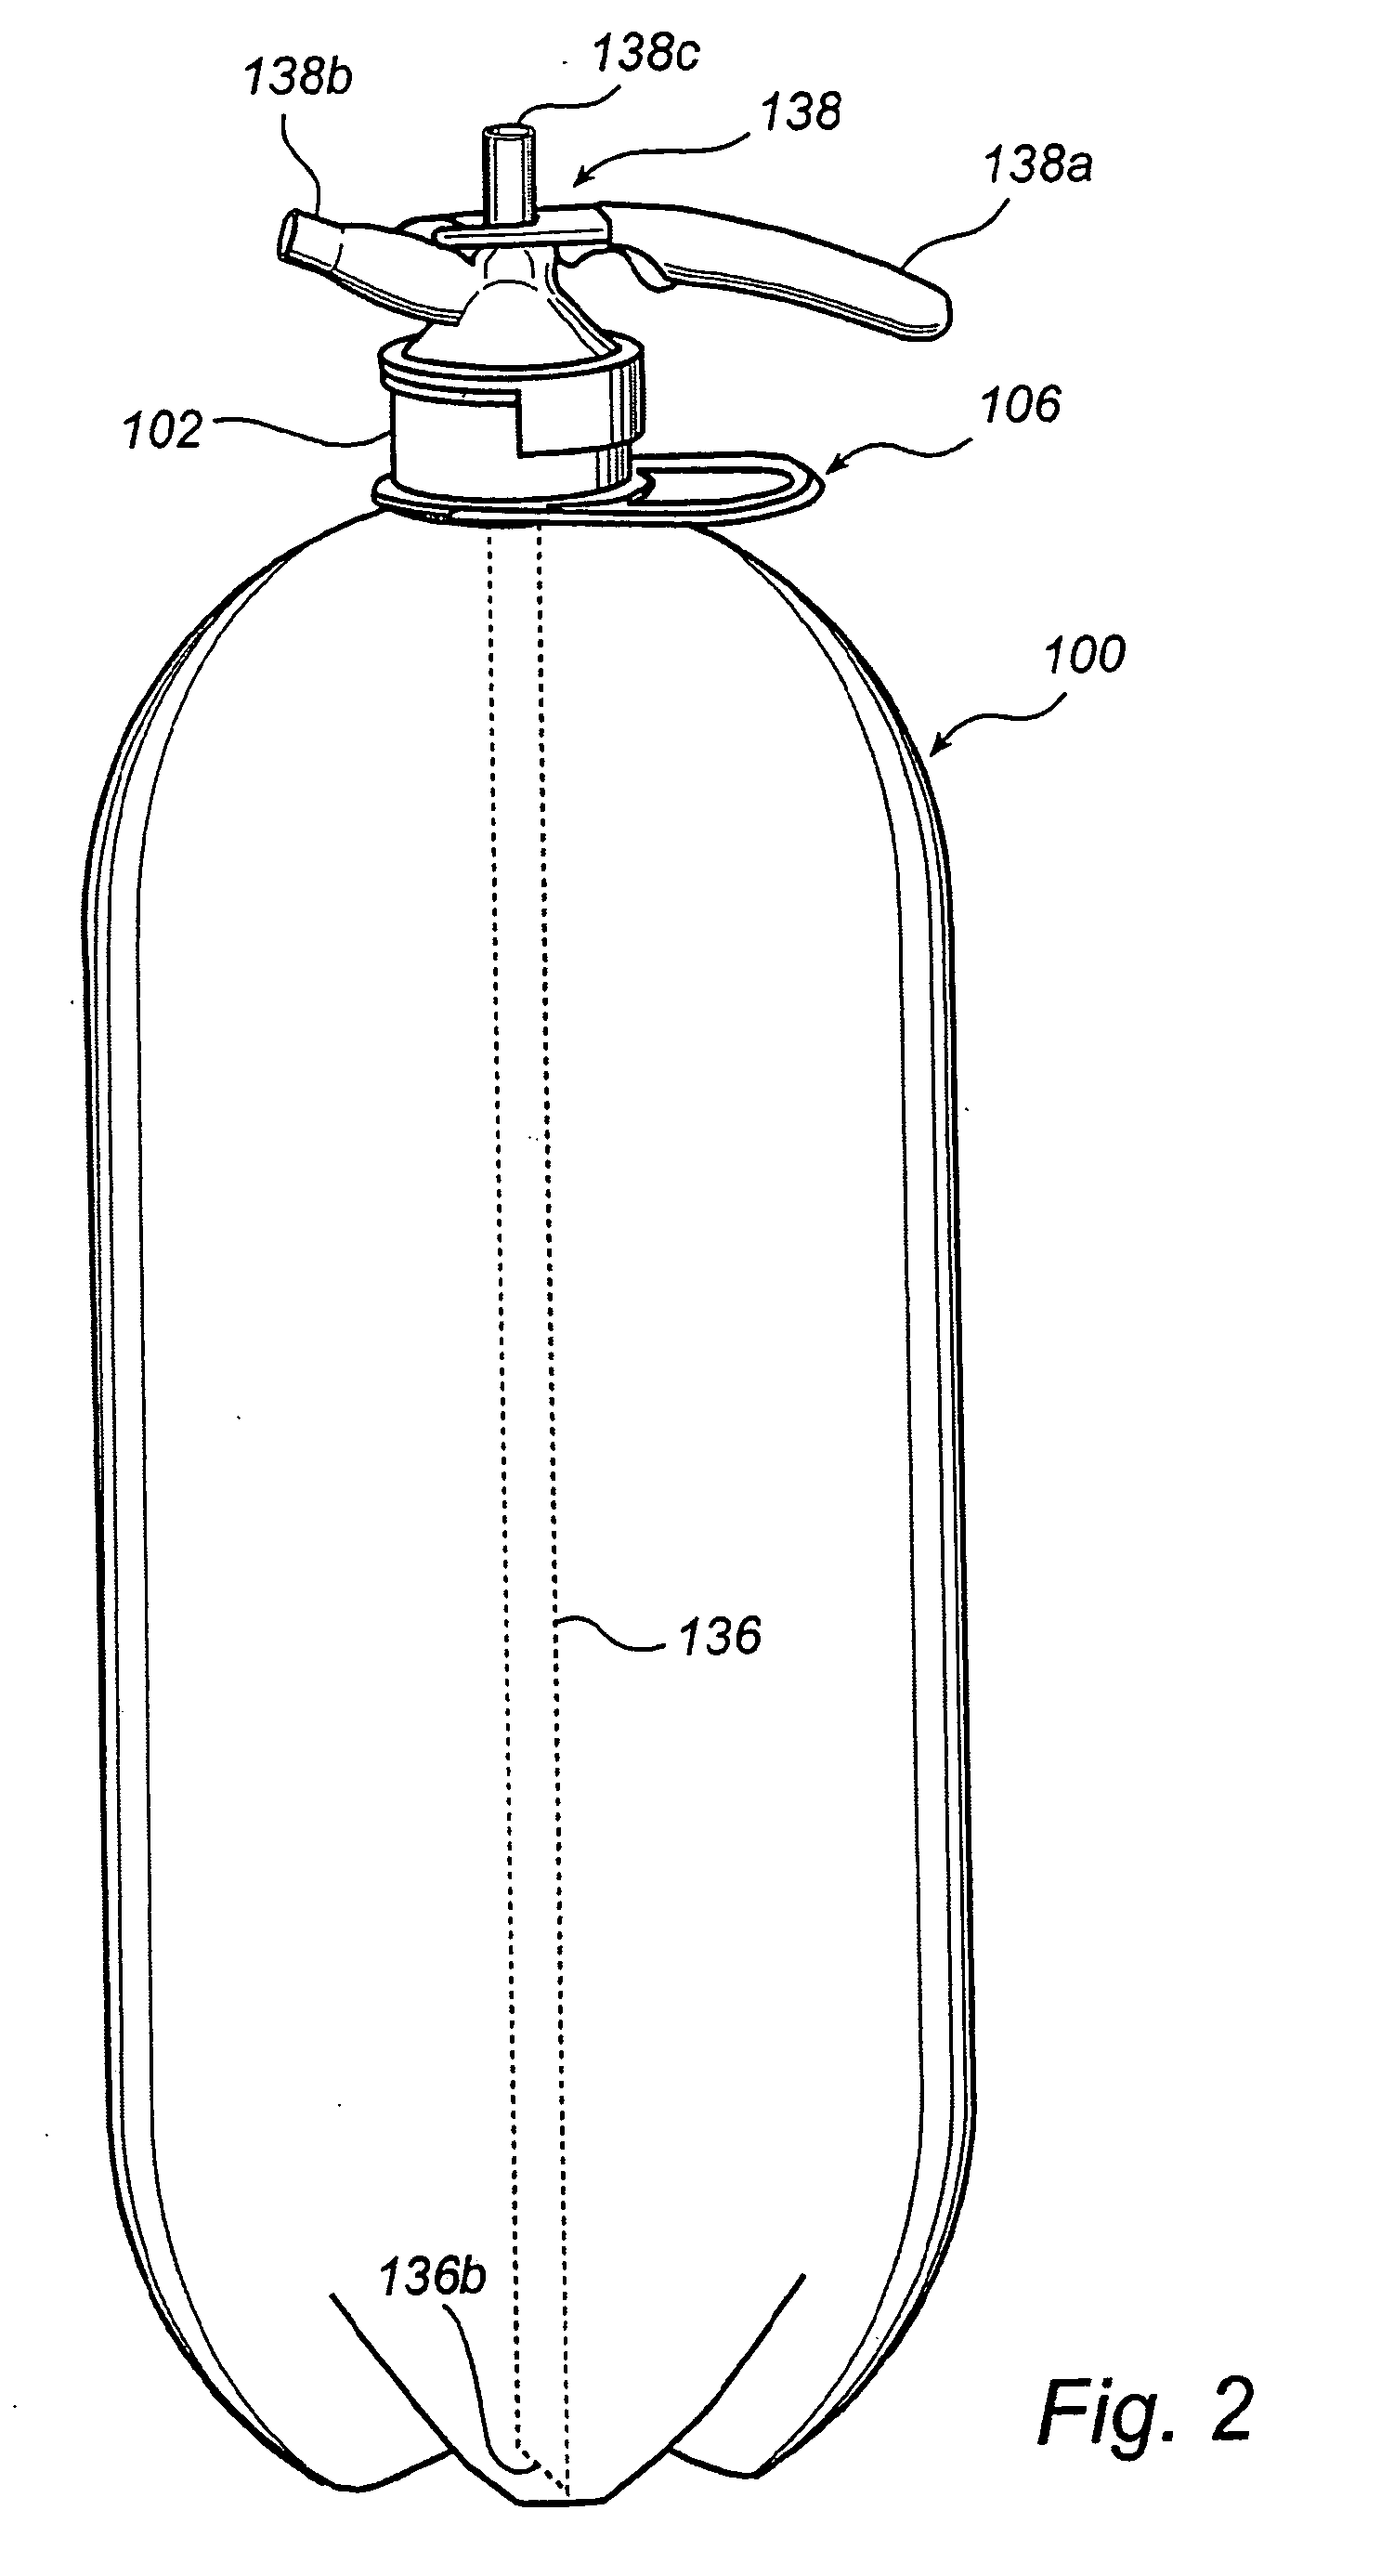 System and Method for Distribution and Dispensing of Beverages